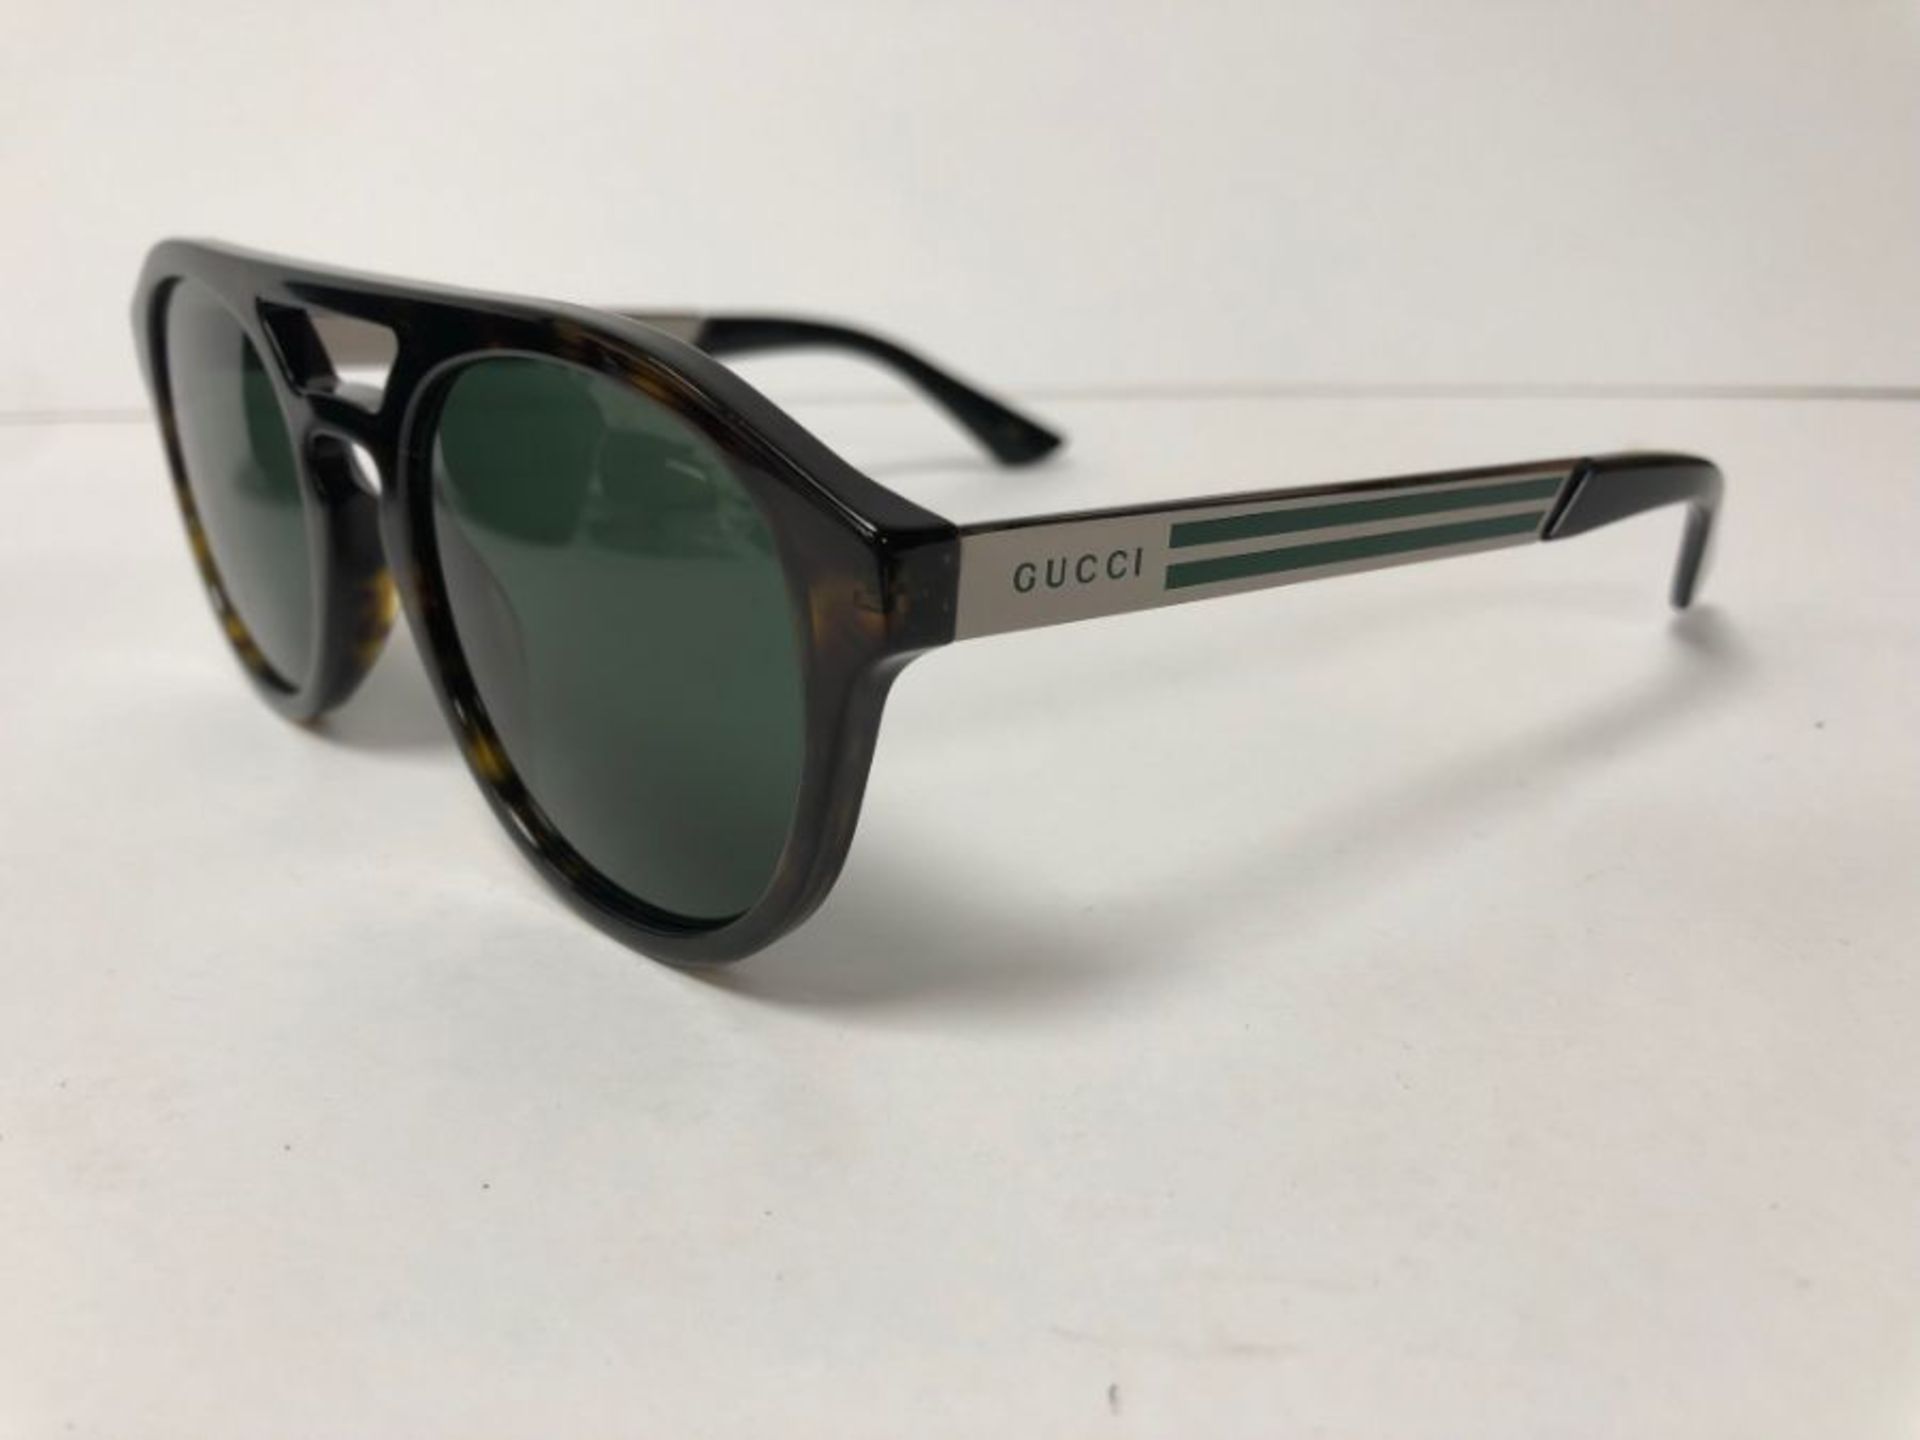 Gucci Men's Sunglasses, Mens, GG0689S Tortoise Shell with case - Image 2 of 7